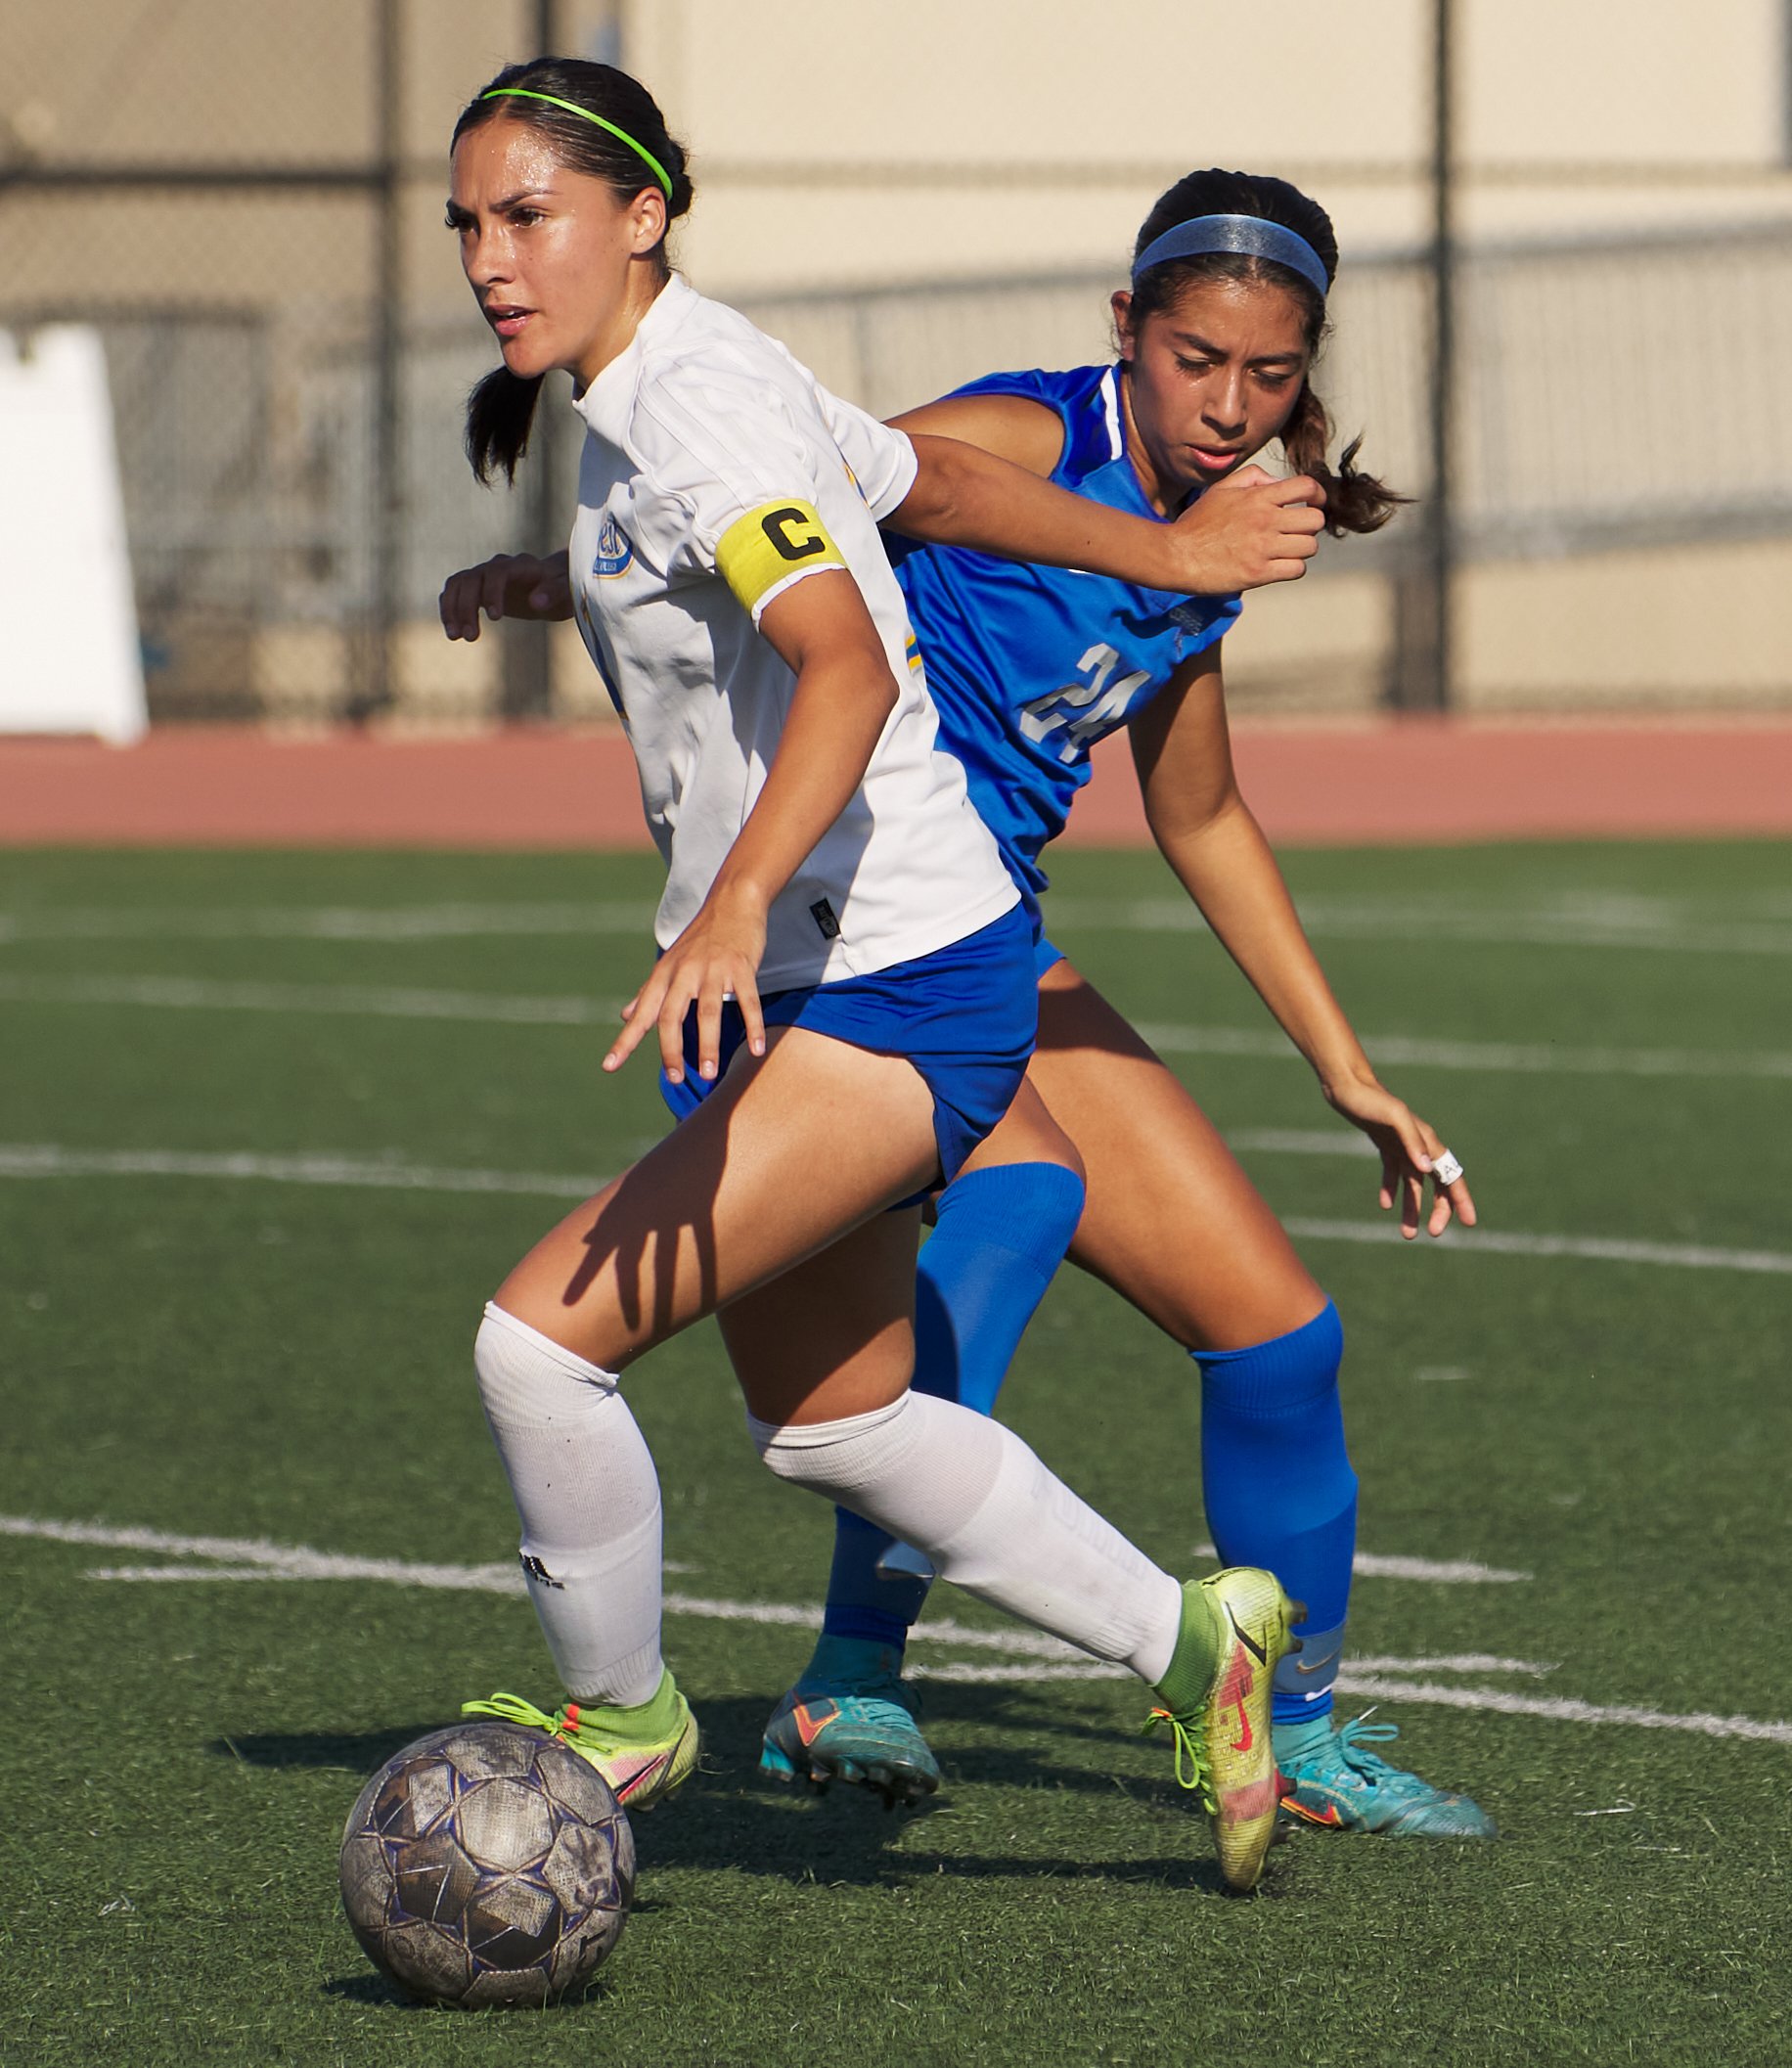  West Los Angeles College Wildcats' America Villalpando and Santa Monica College Corsairs' Andrea Ortiz at the women's soccer match on Friday, Sept. 30, 2022, at Corsair Field in Santa Monica, Calif. The Corsairs won 3-2. (Nicholas McCall | The Corsa